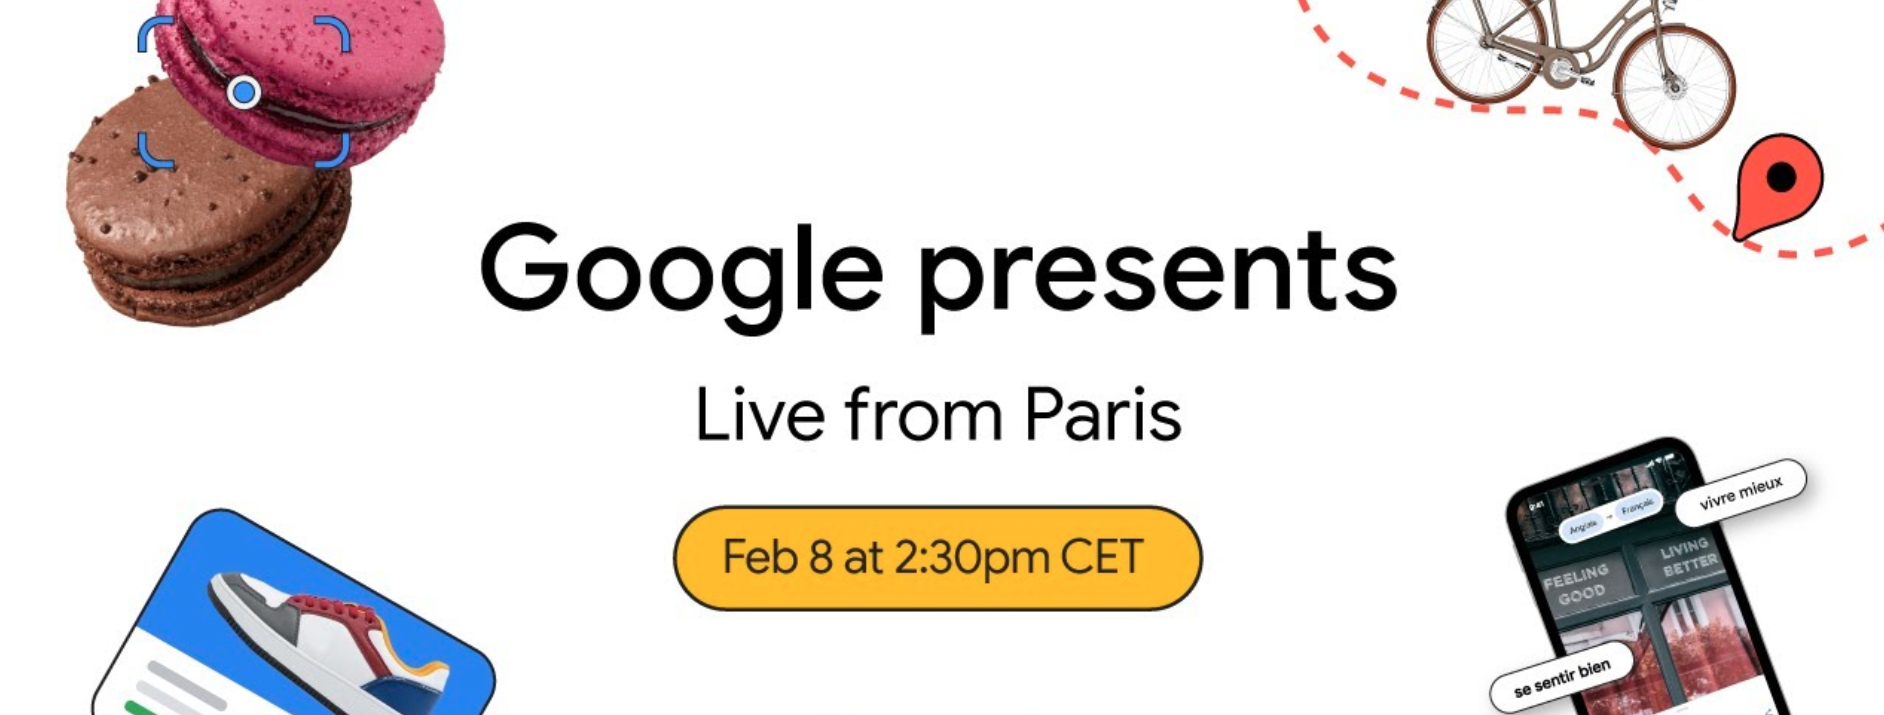 Google's February 8th live event is about Search, Maps and AI